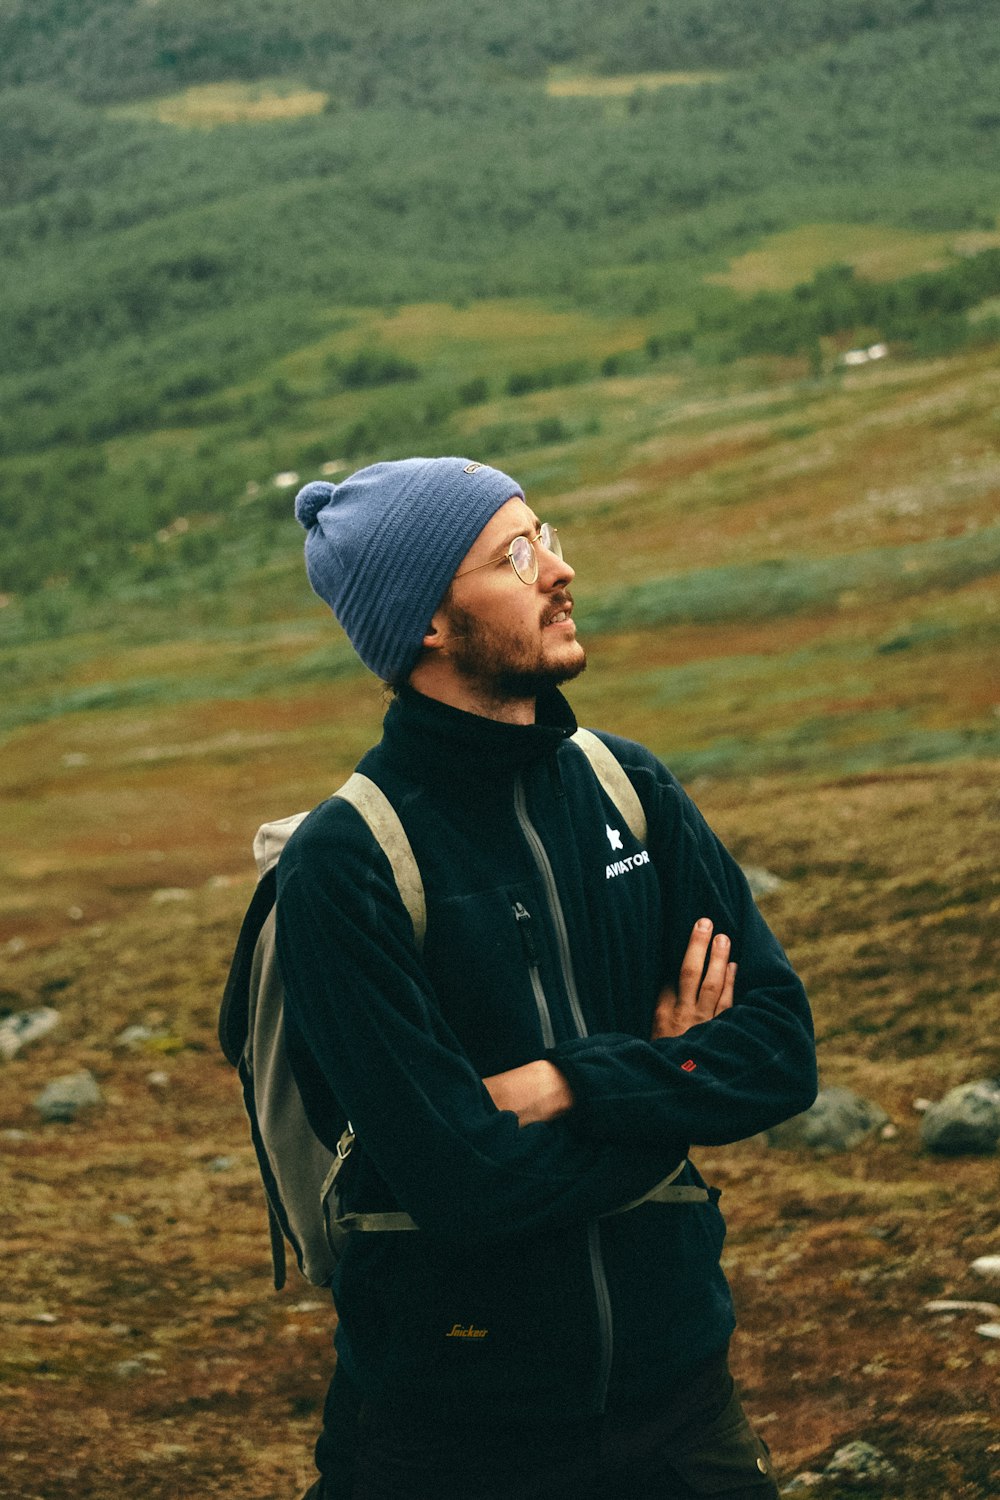 Man in black jacket and gray knit cap standing on brown field during  daytime photo – Free Sverige Image on Unsplash